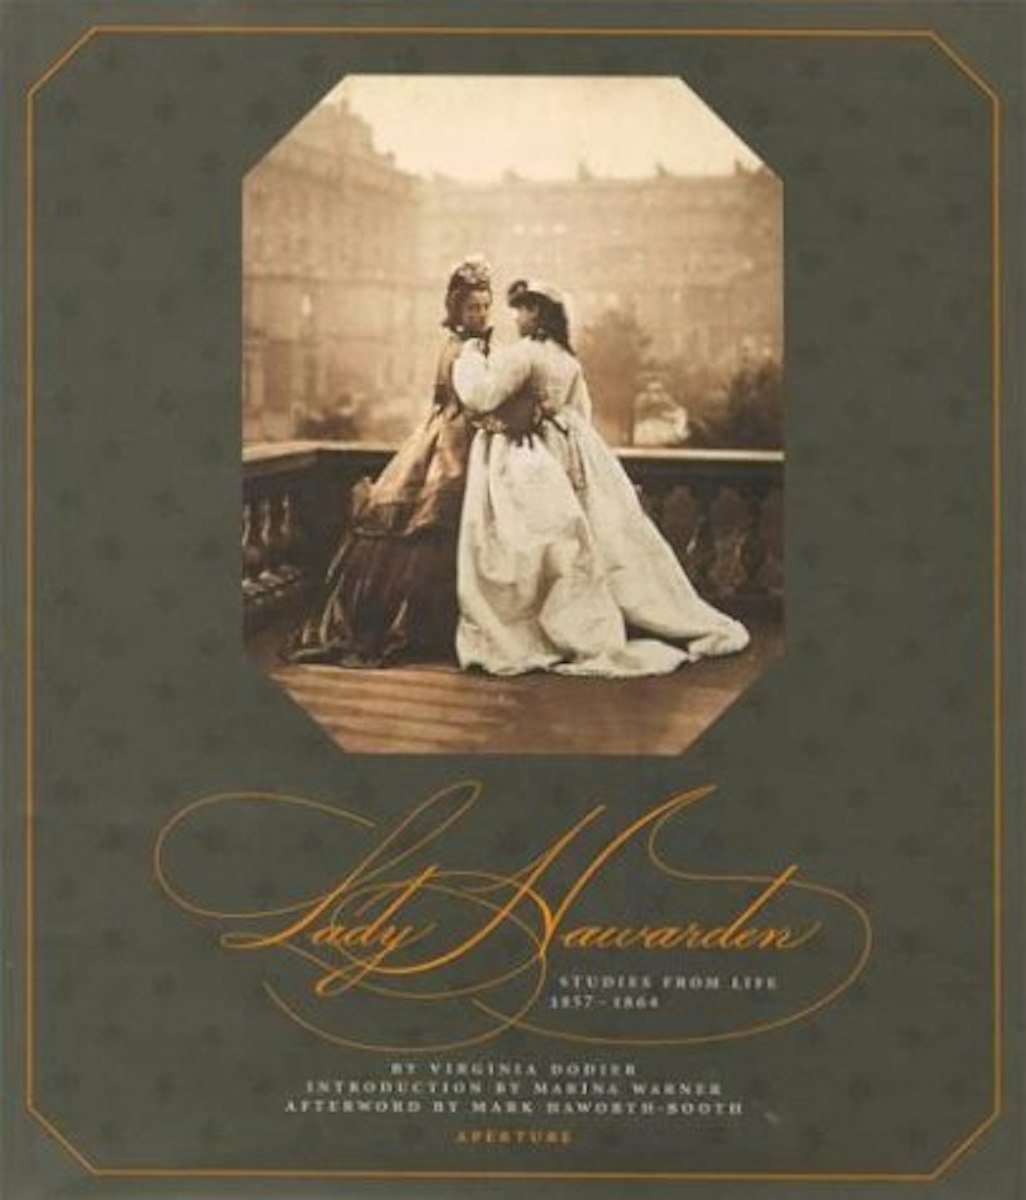 Lady Hawarden: Studies from Life, 1857–1864 cover